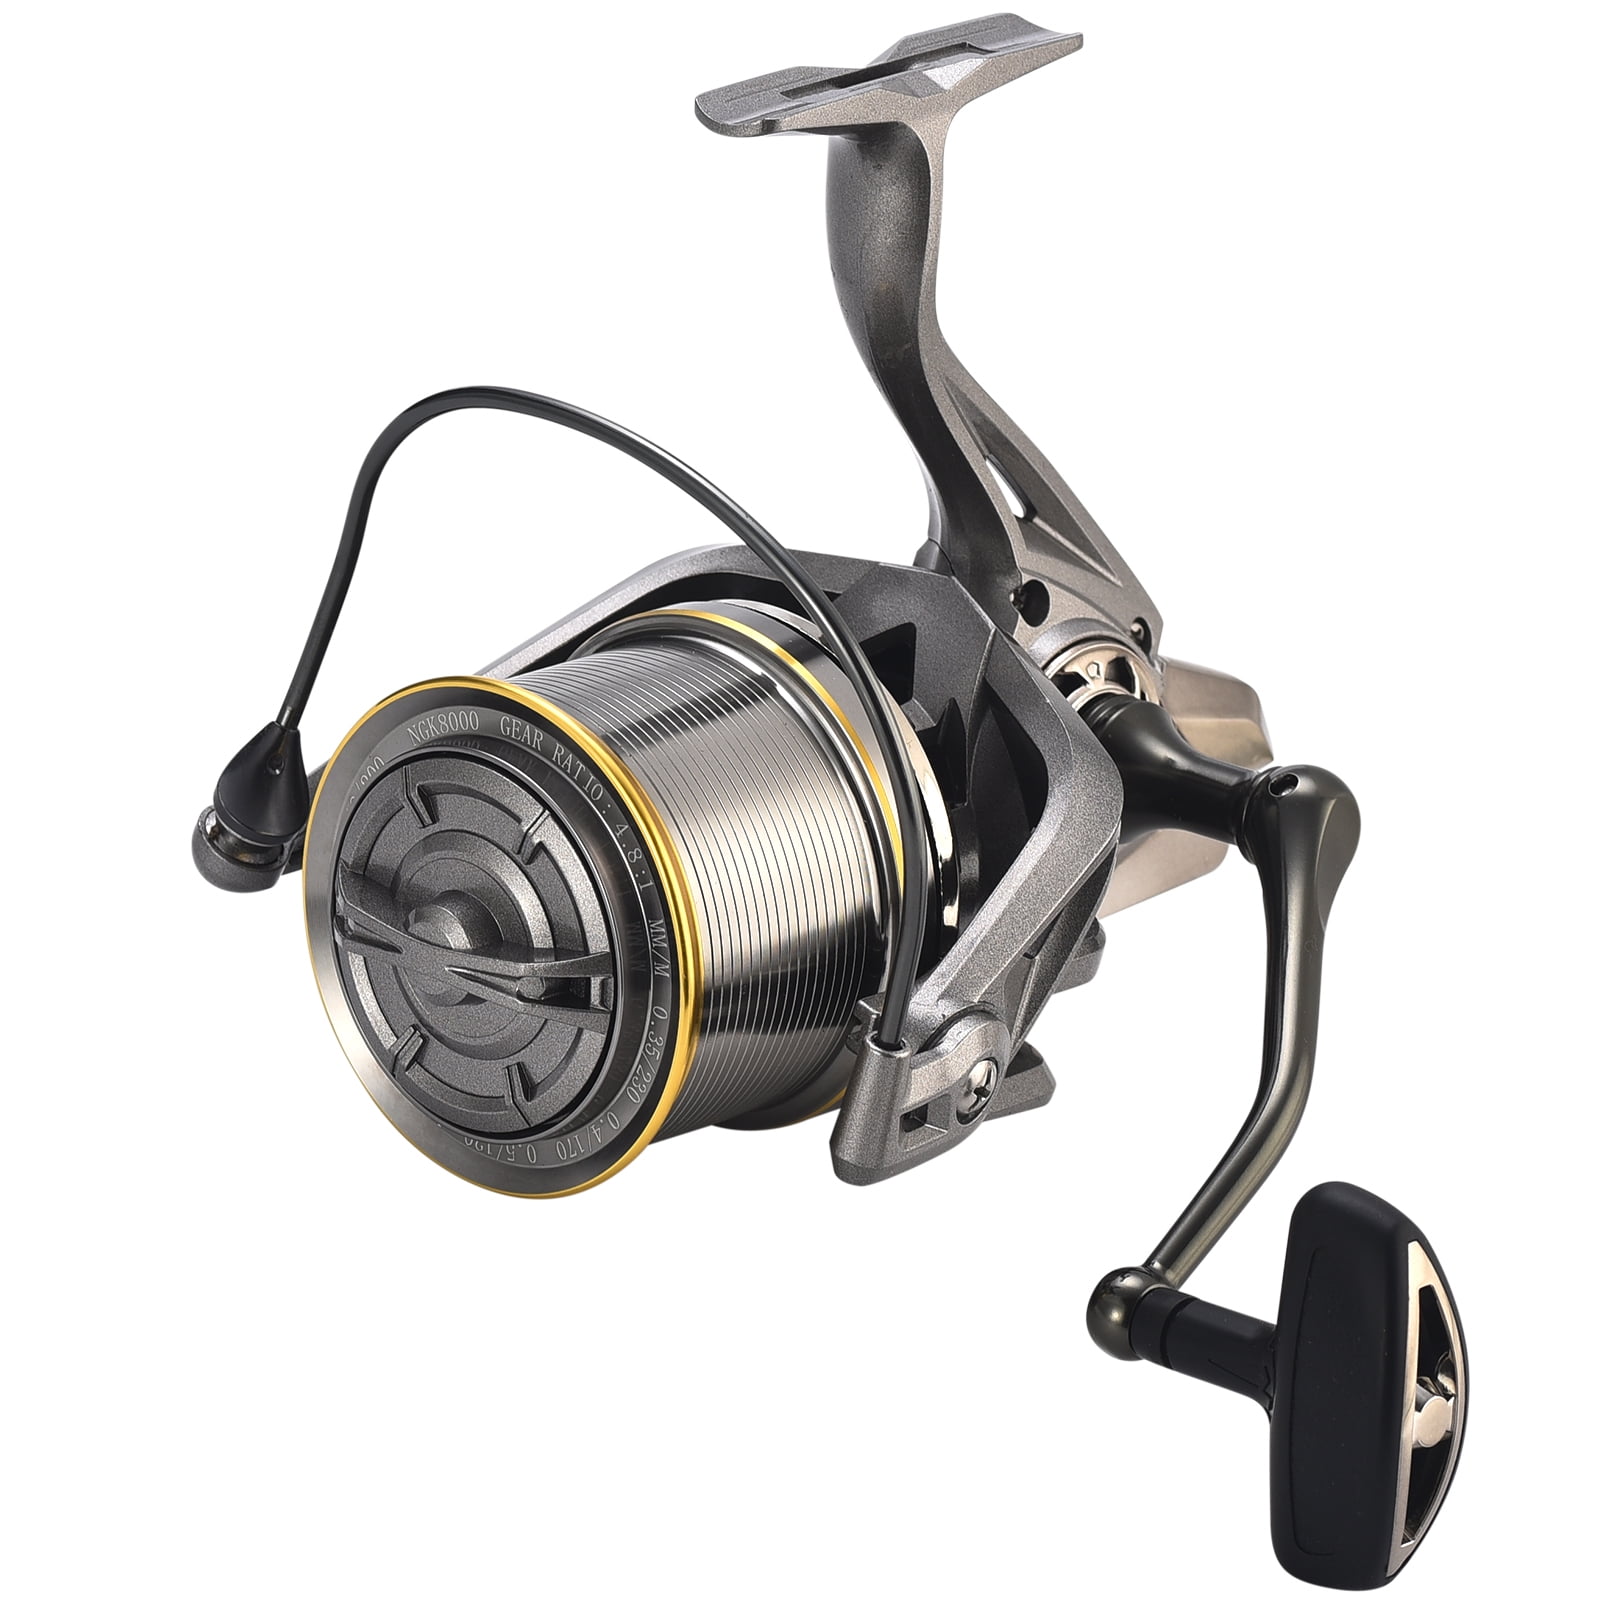 NGK8000 Spinning Reel with 17+1BB Metal and Nylon Material for Durability  and Smooth Cast